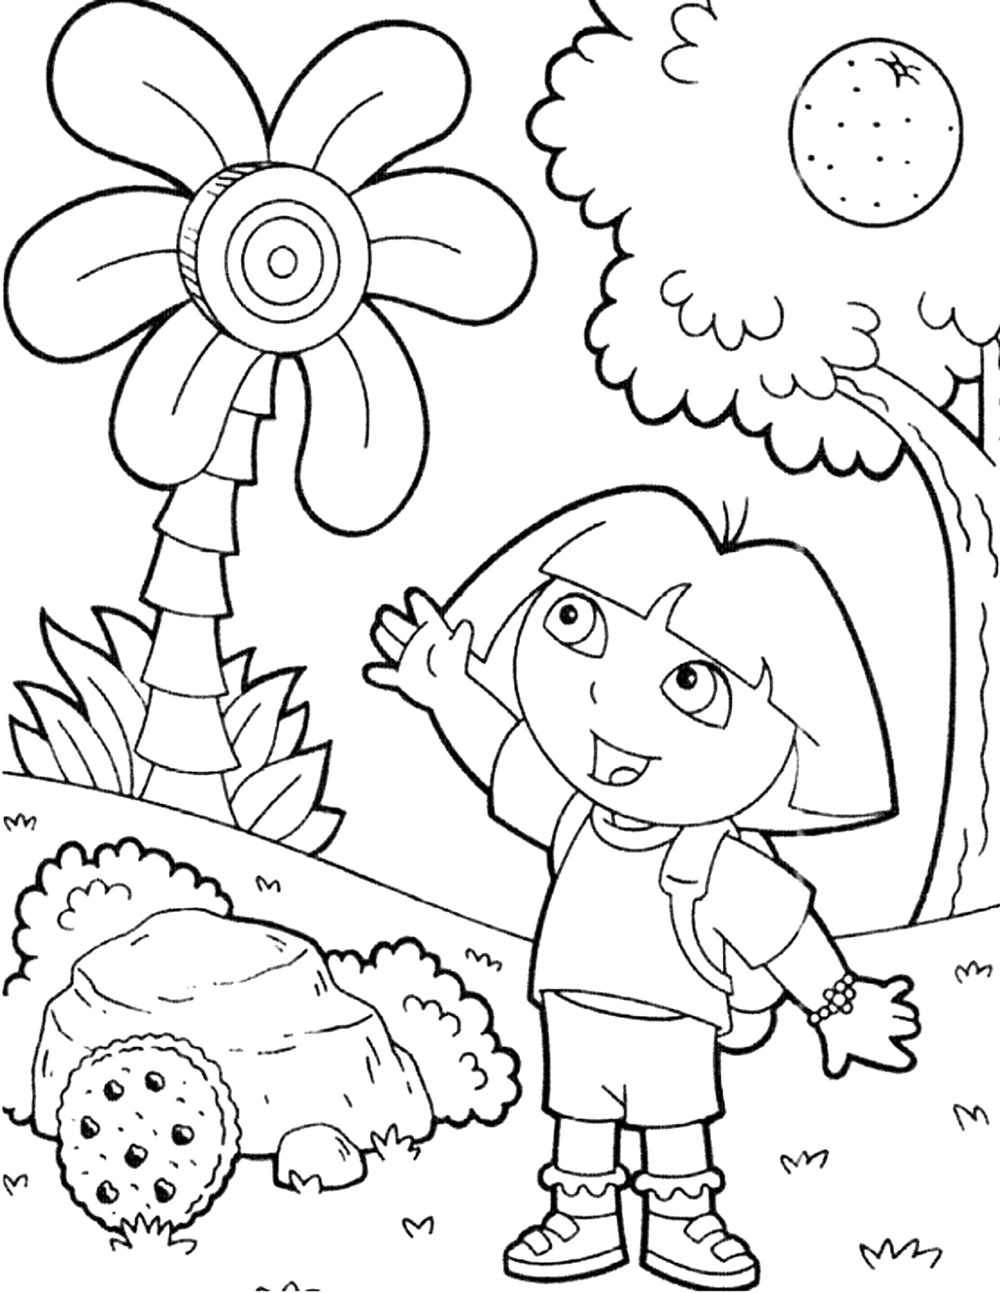 Coloring Pages For Dora The Explorer Star Coloring Pages Free Coloring ...